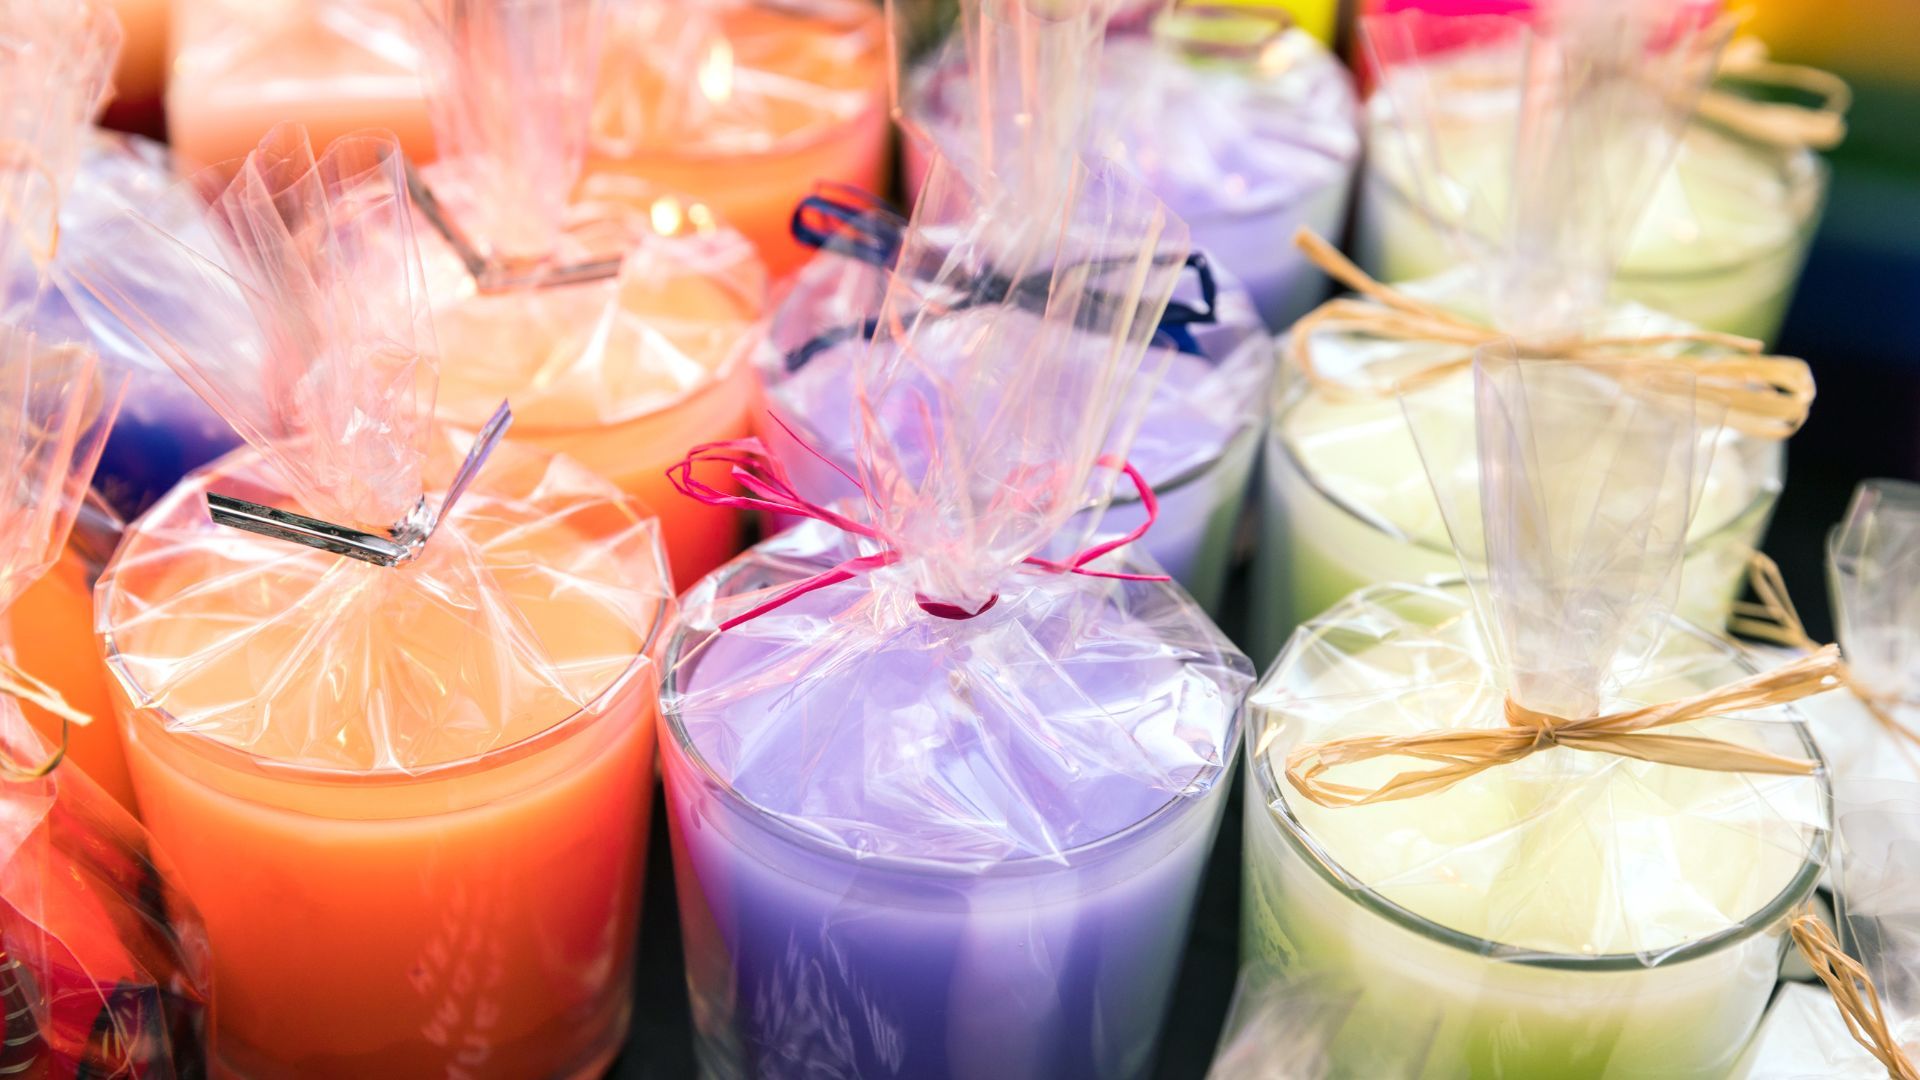 Pride-inspired scented candles